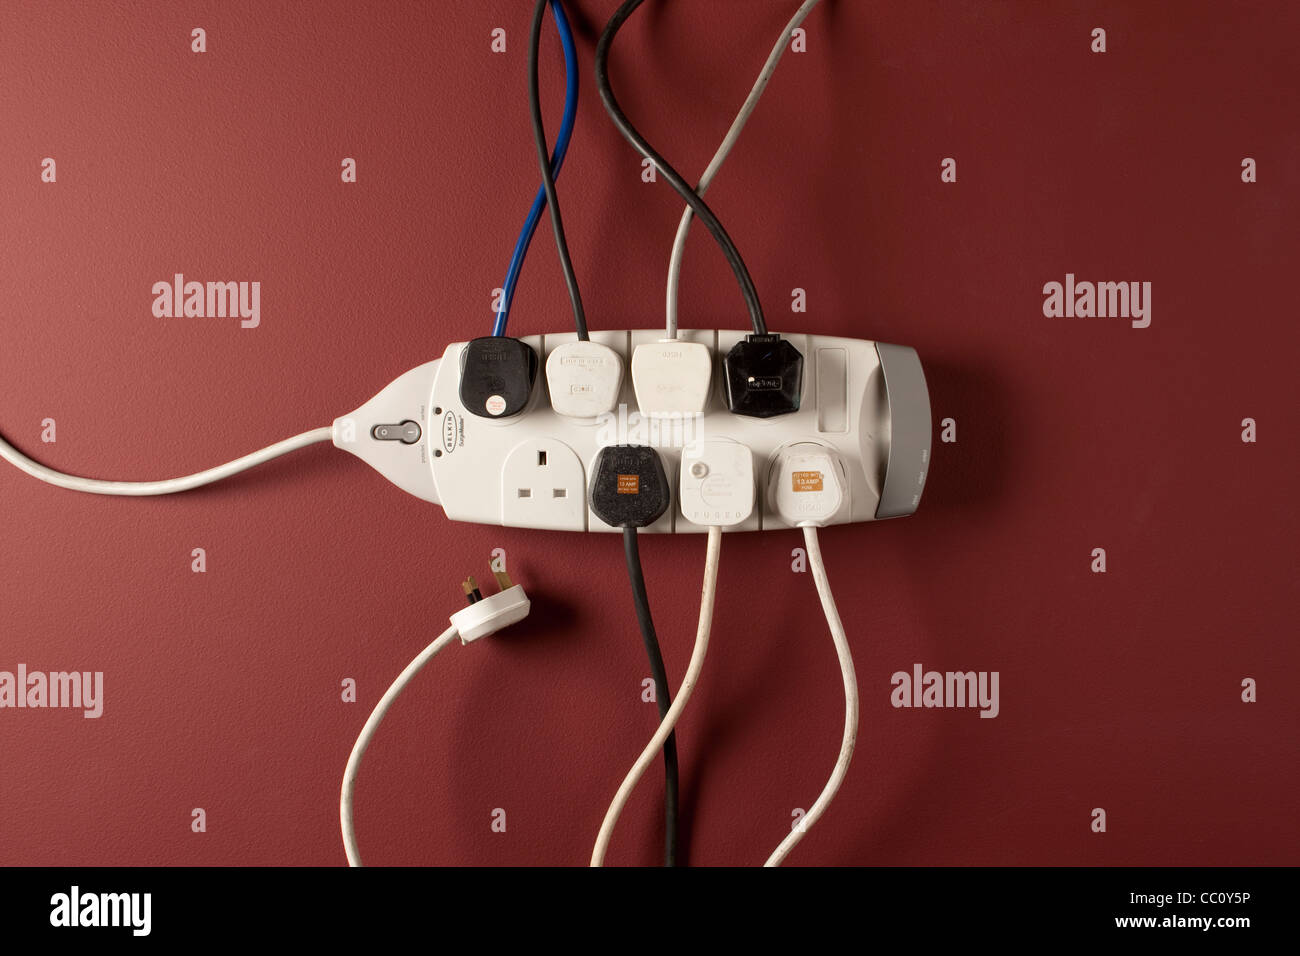 Plugs in extension socket Stock Photo